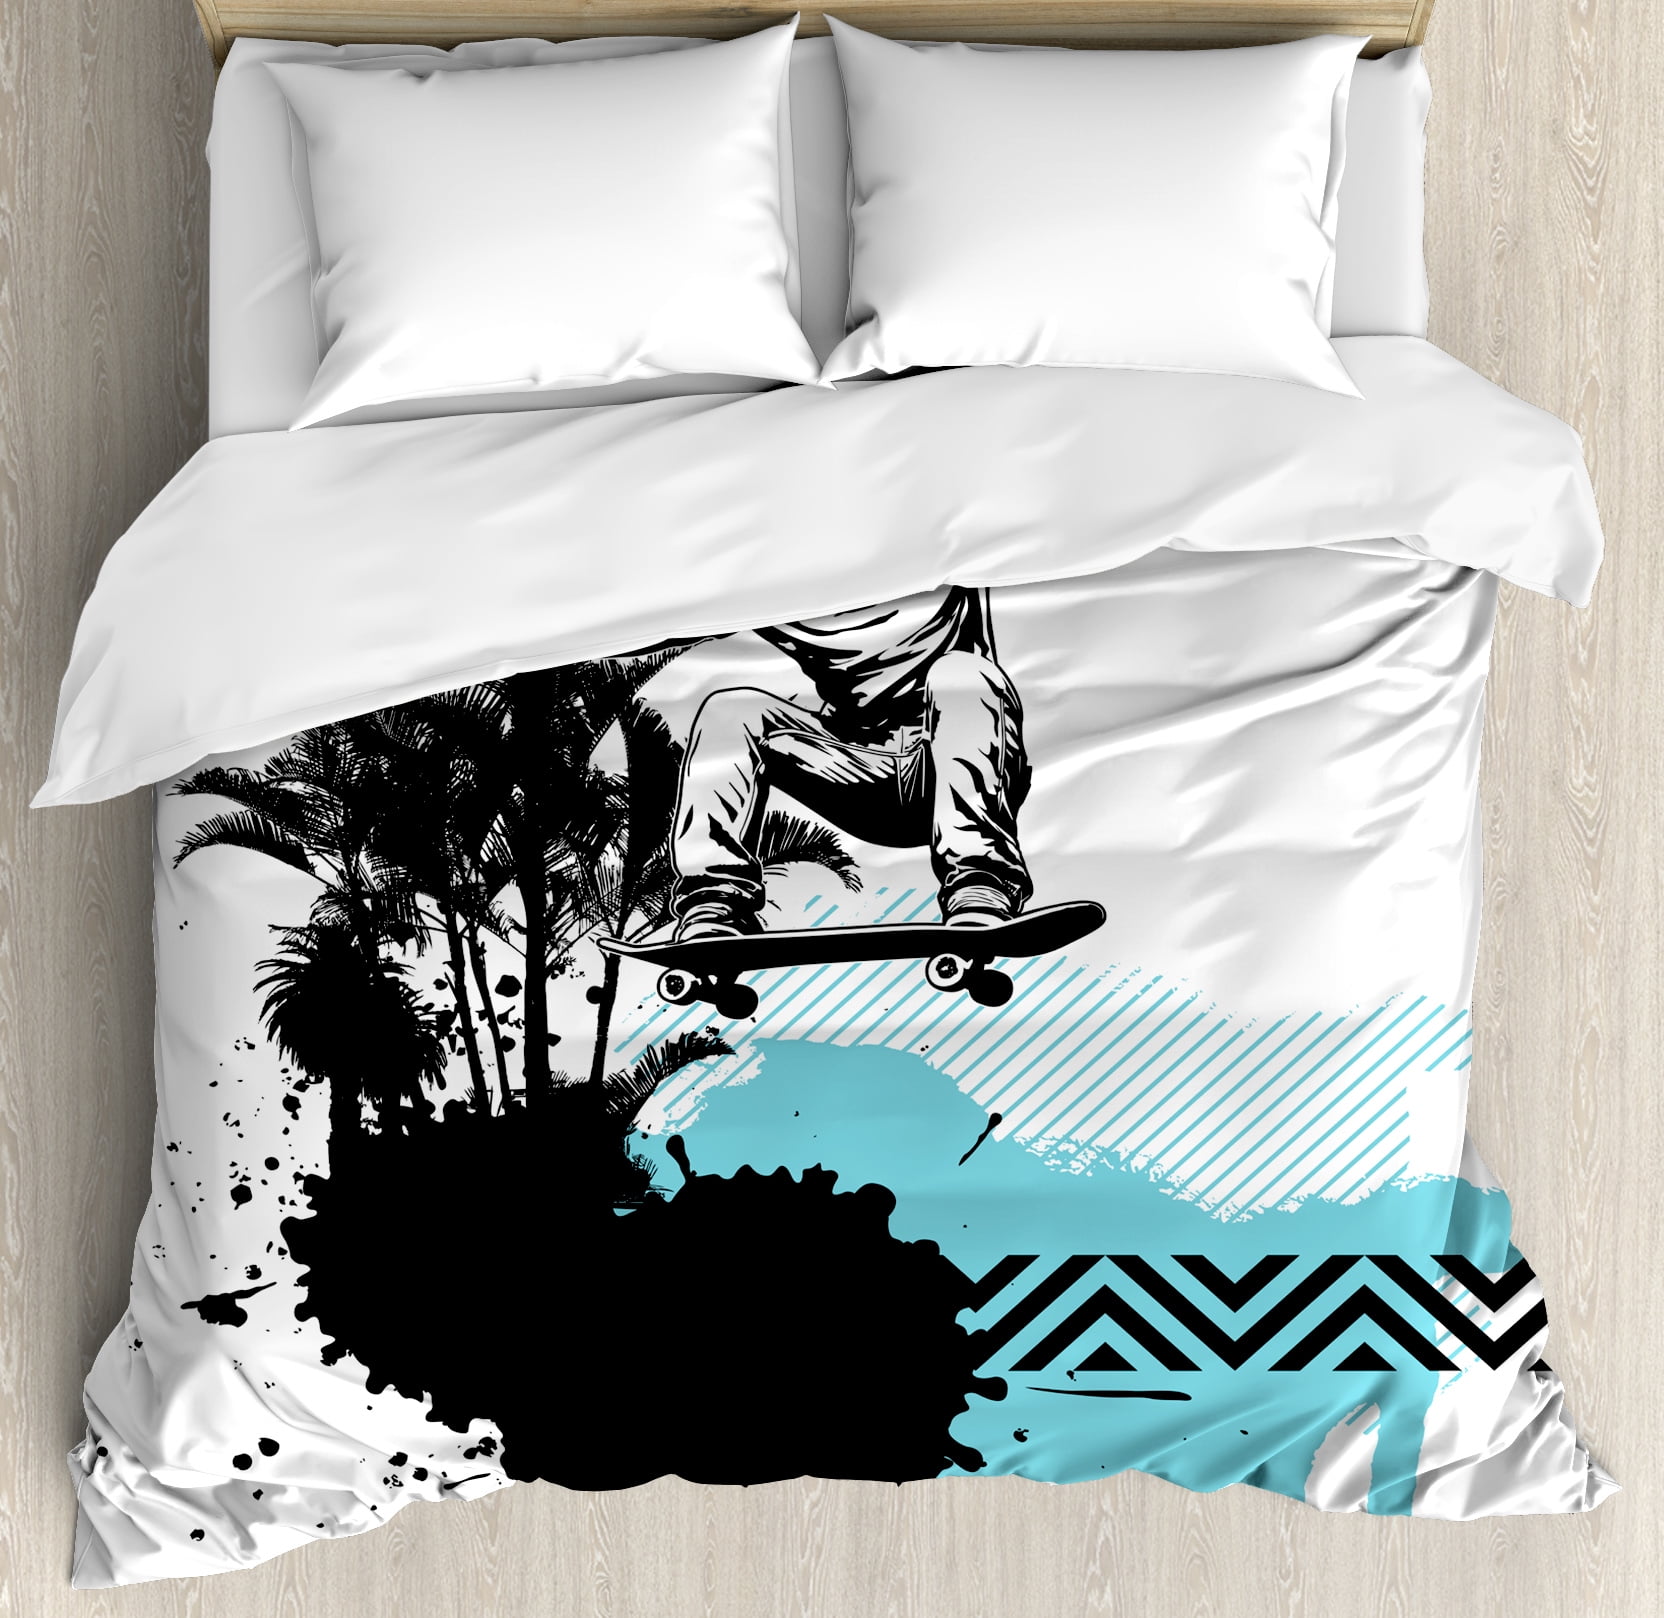 Grunge Queen Size Duvet Cover Set Young Boy Skater Jumping Exotic